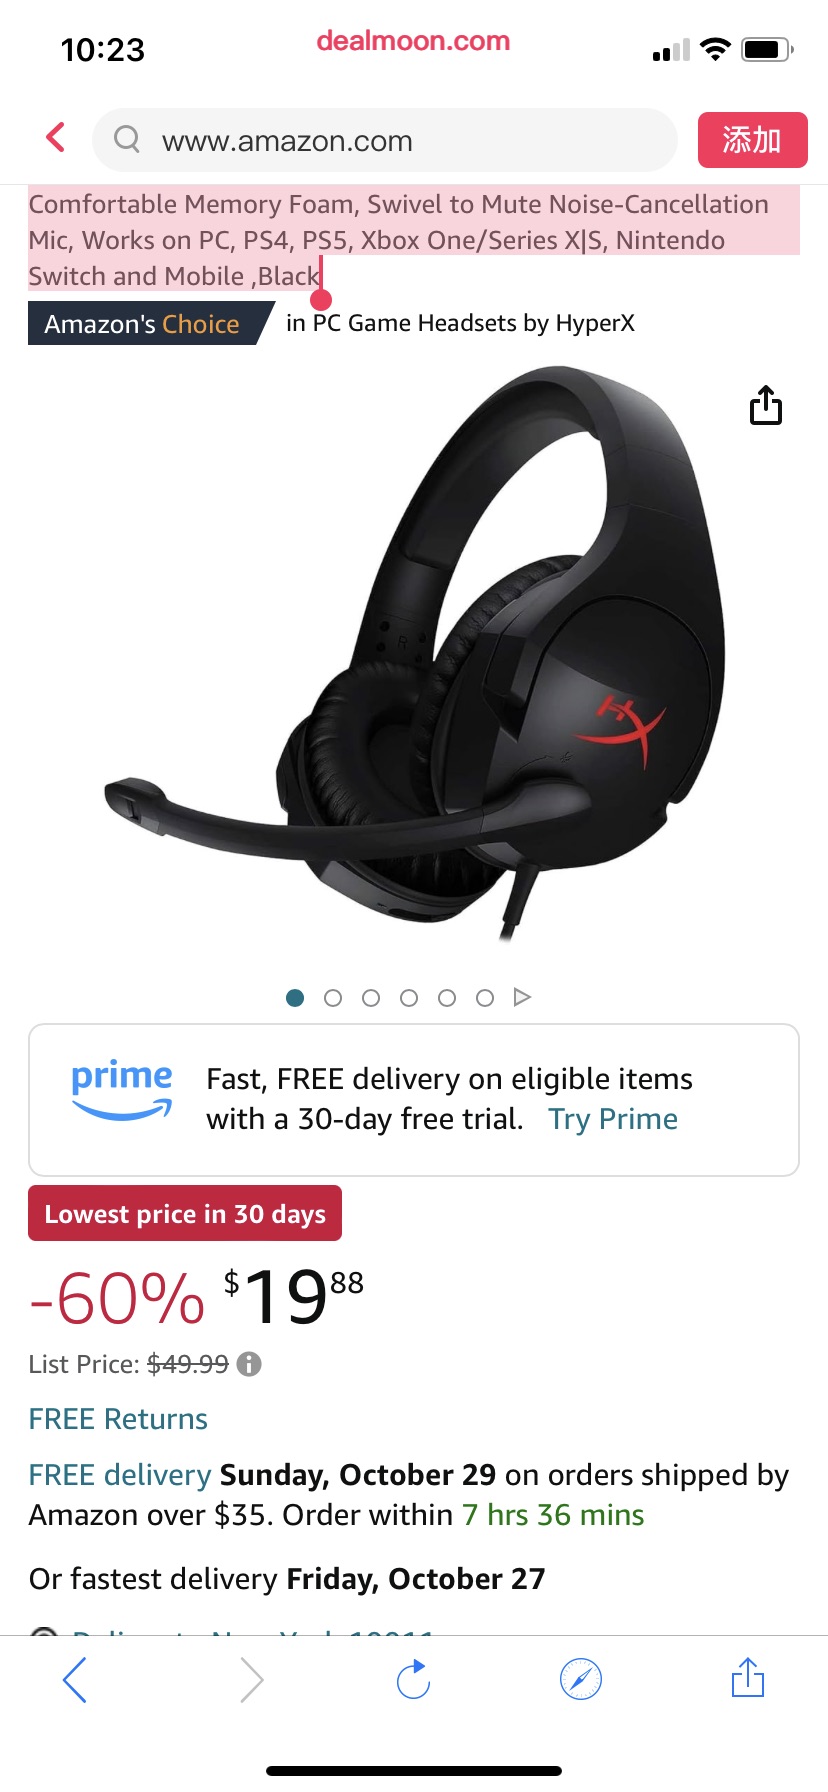 HyperX Cloud Stinger – Gaming Headset, Lightweight, Comfortable Memory Foam, Swivel to Mute Noise-Cancellation Mic, Works on PC, PS4, PS5, Xbox One/Series X|S, Nintendo Switch and Mobile ,Black记忆棉游戏耳机